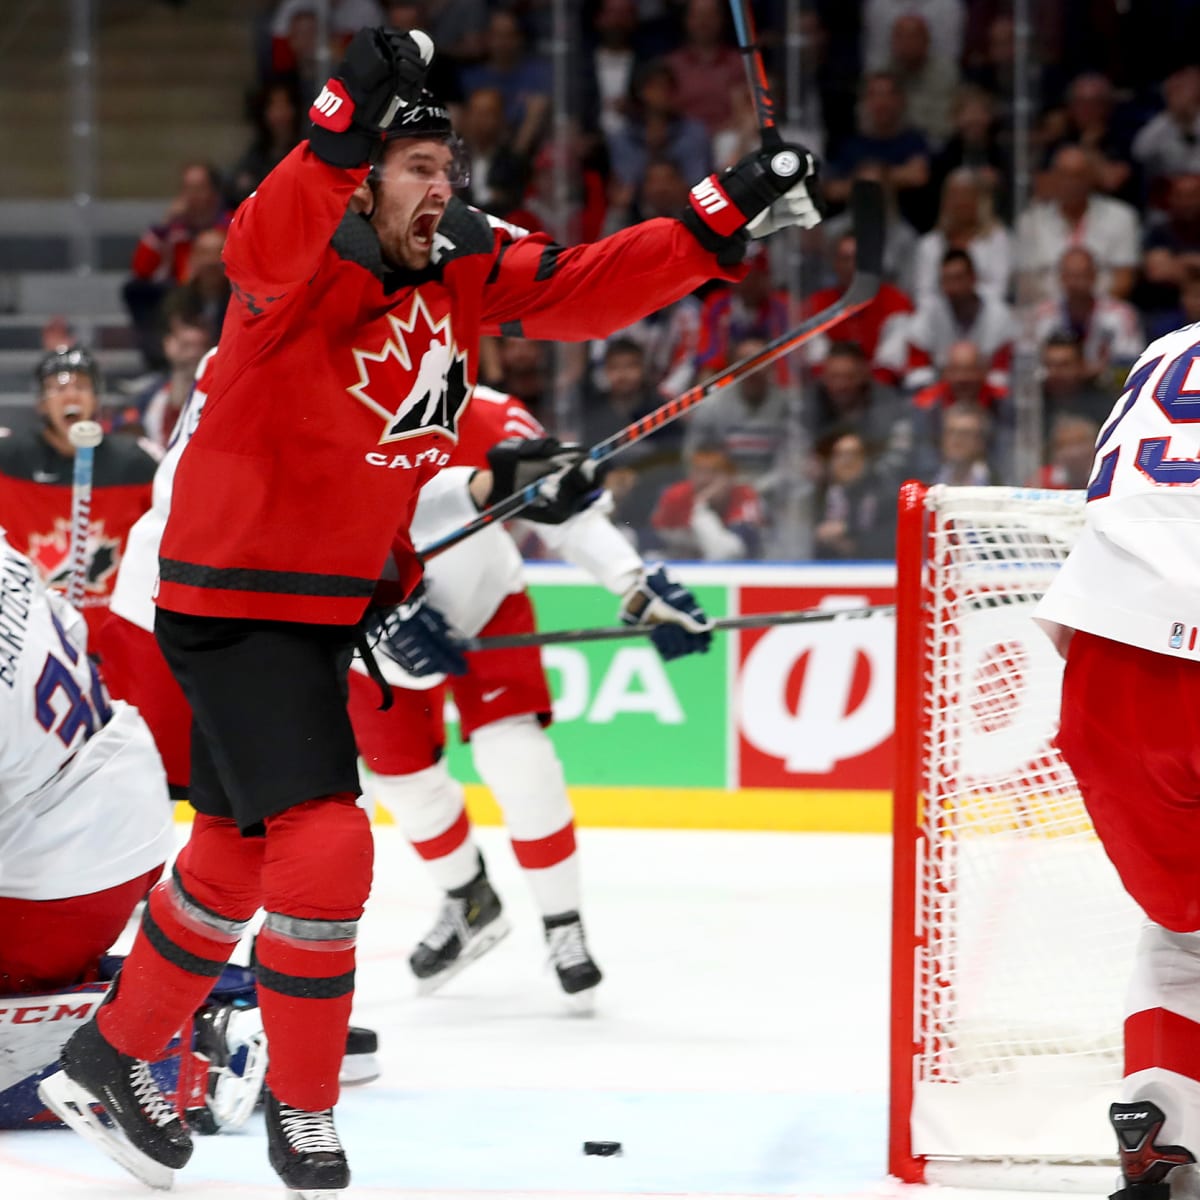 IIHF world championship Canada, Finland set for title game